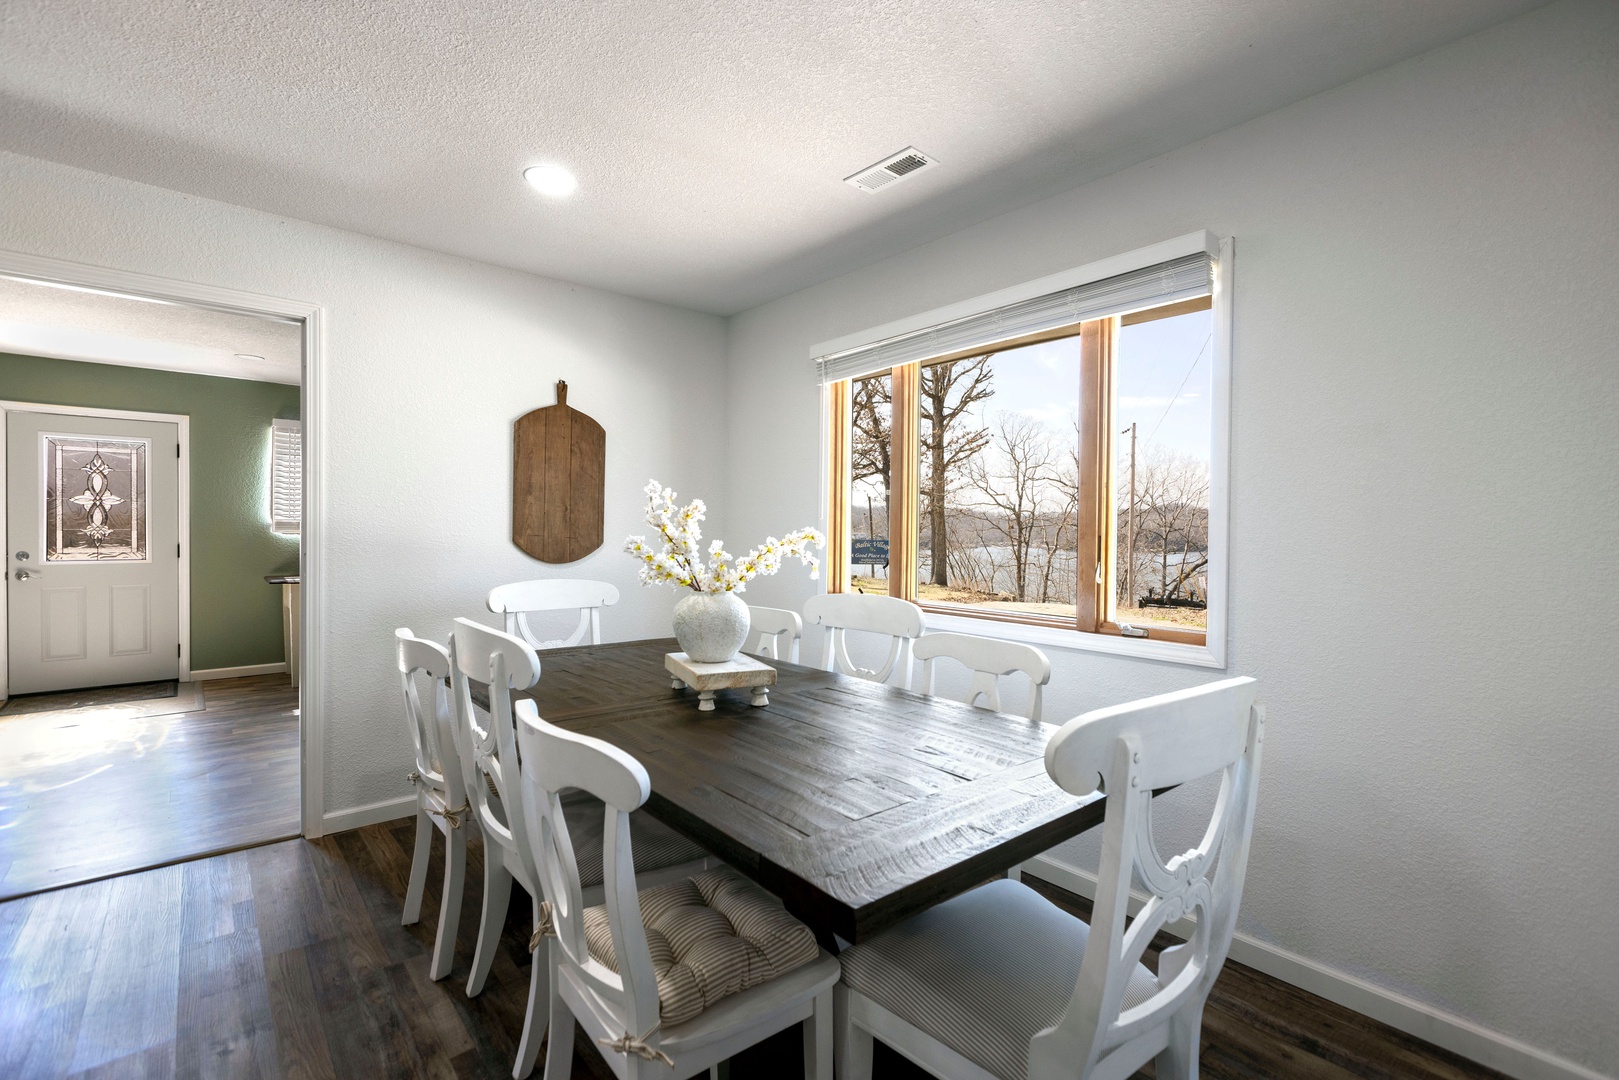 Enjoy the larger dining table offered in the 2nd kitchen